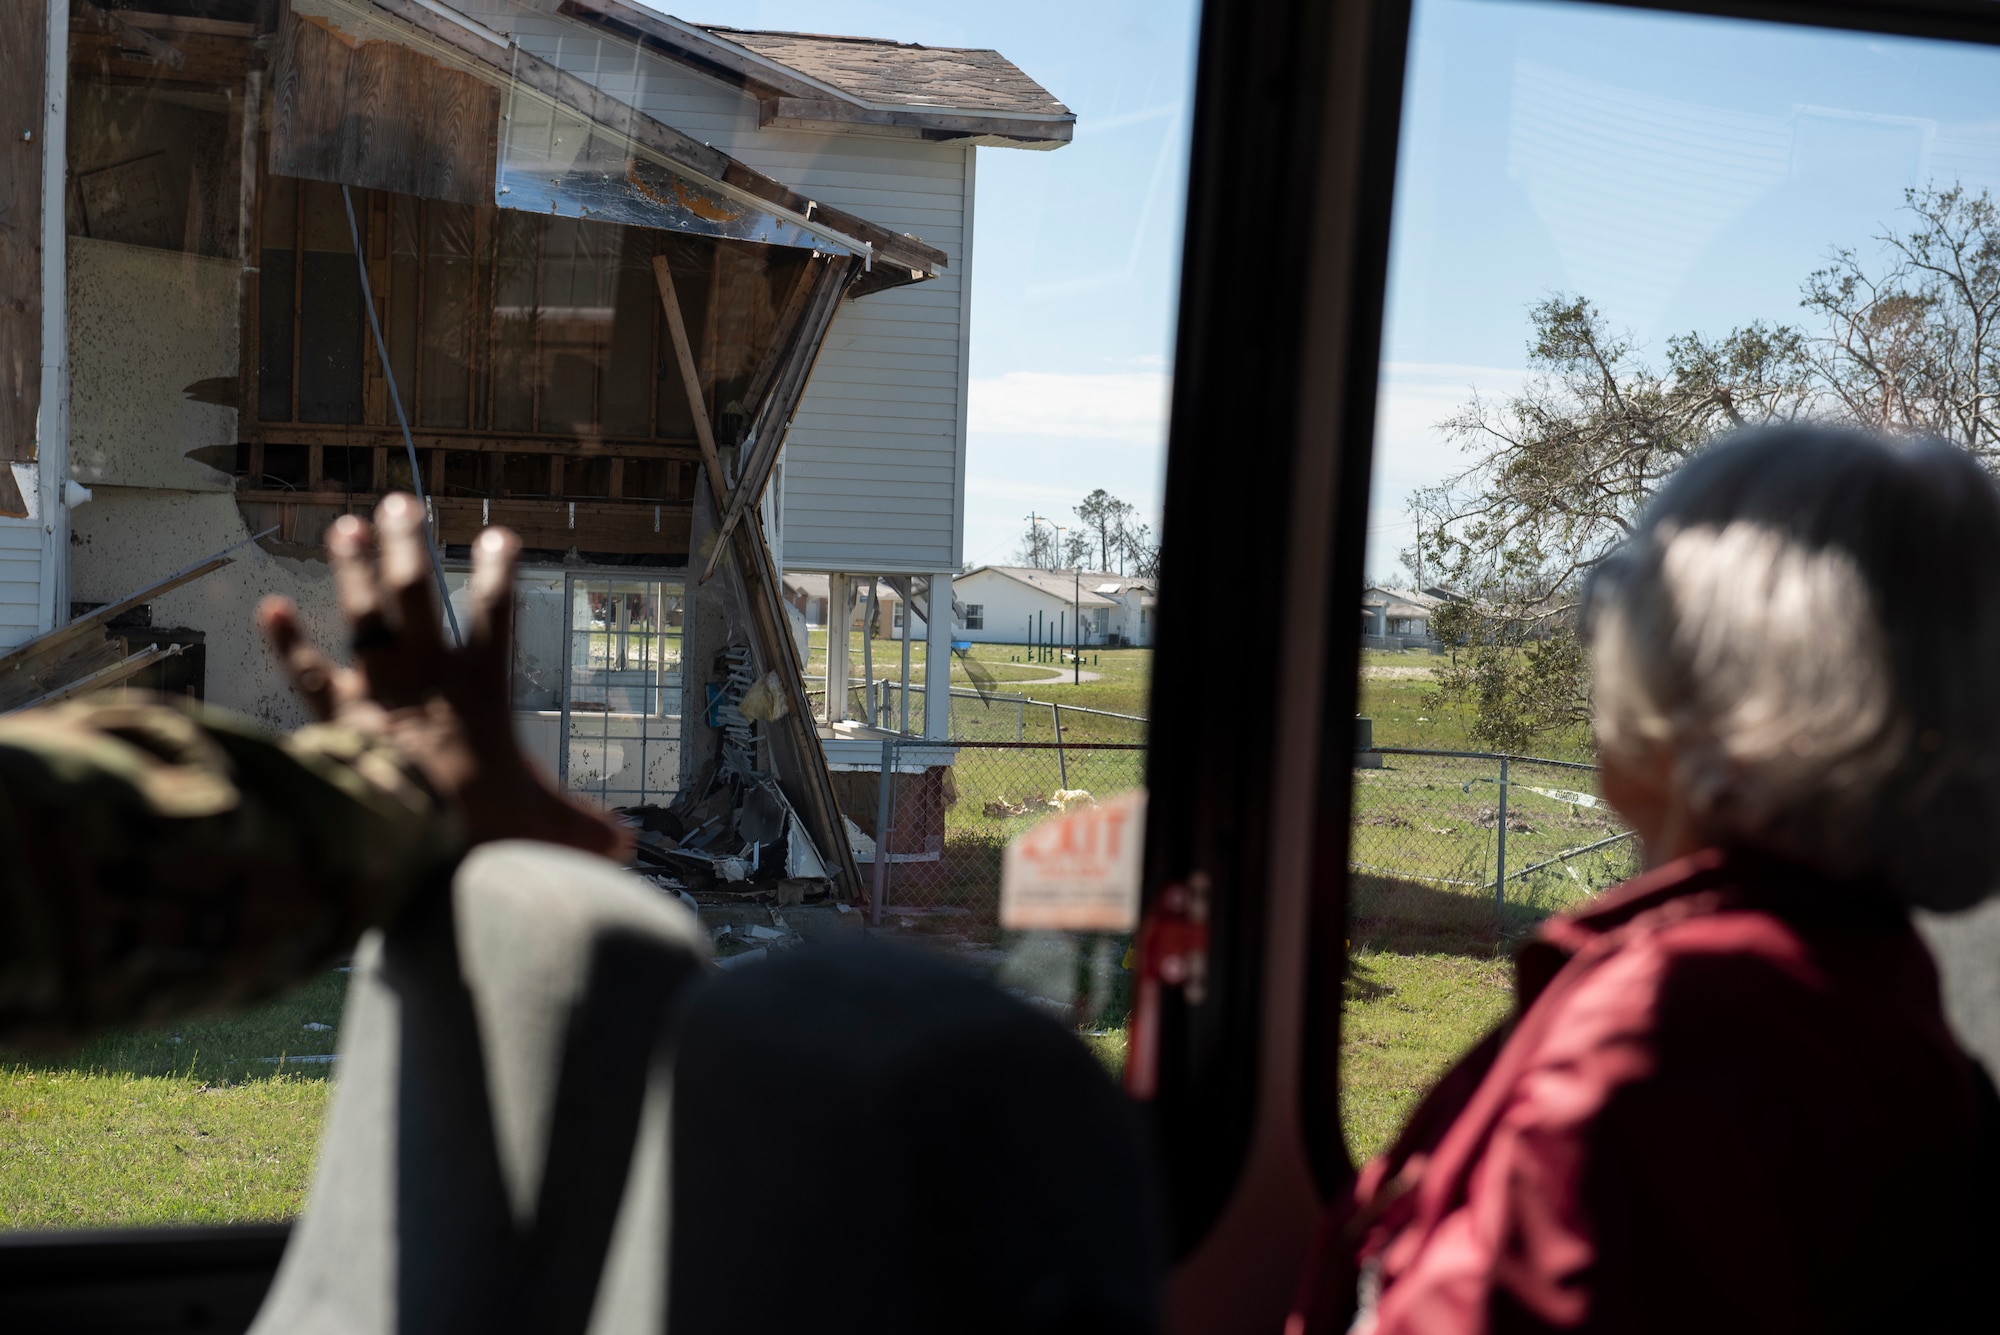 Mary Tyndall Troff, daughter of World War I pilot Lt. Frank B. Tyndall, 2nd Bombardment Group, looks out a window to see the destruction caused to the housing community by Hurricane Michael at Tyndall Air Force Base, Fla., Feb. 25, 2019. Mary and her daughters were invited to visit TAFB after she sent a letter about her concerns for the base and the well-being of Airmen after Hurricane Michael. (U.S. Air Force photo by Staff Sgt. Alexandre Montes)